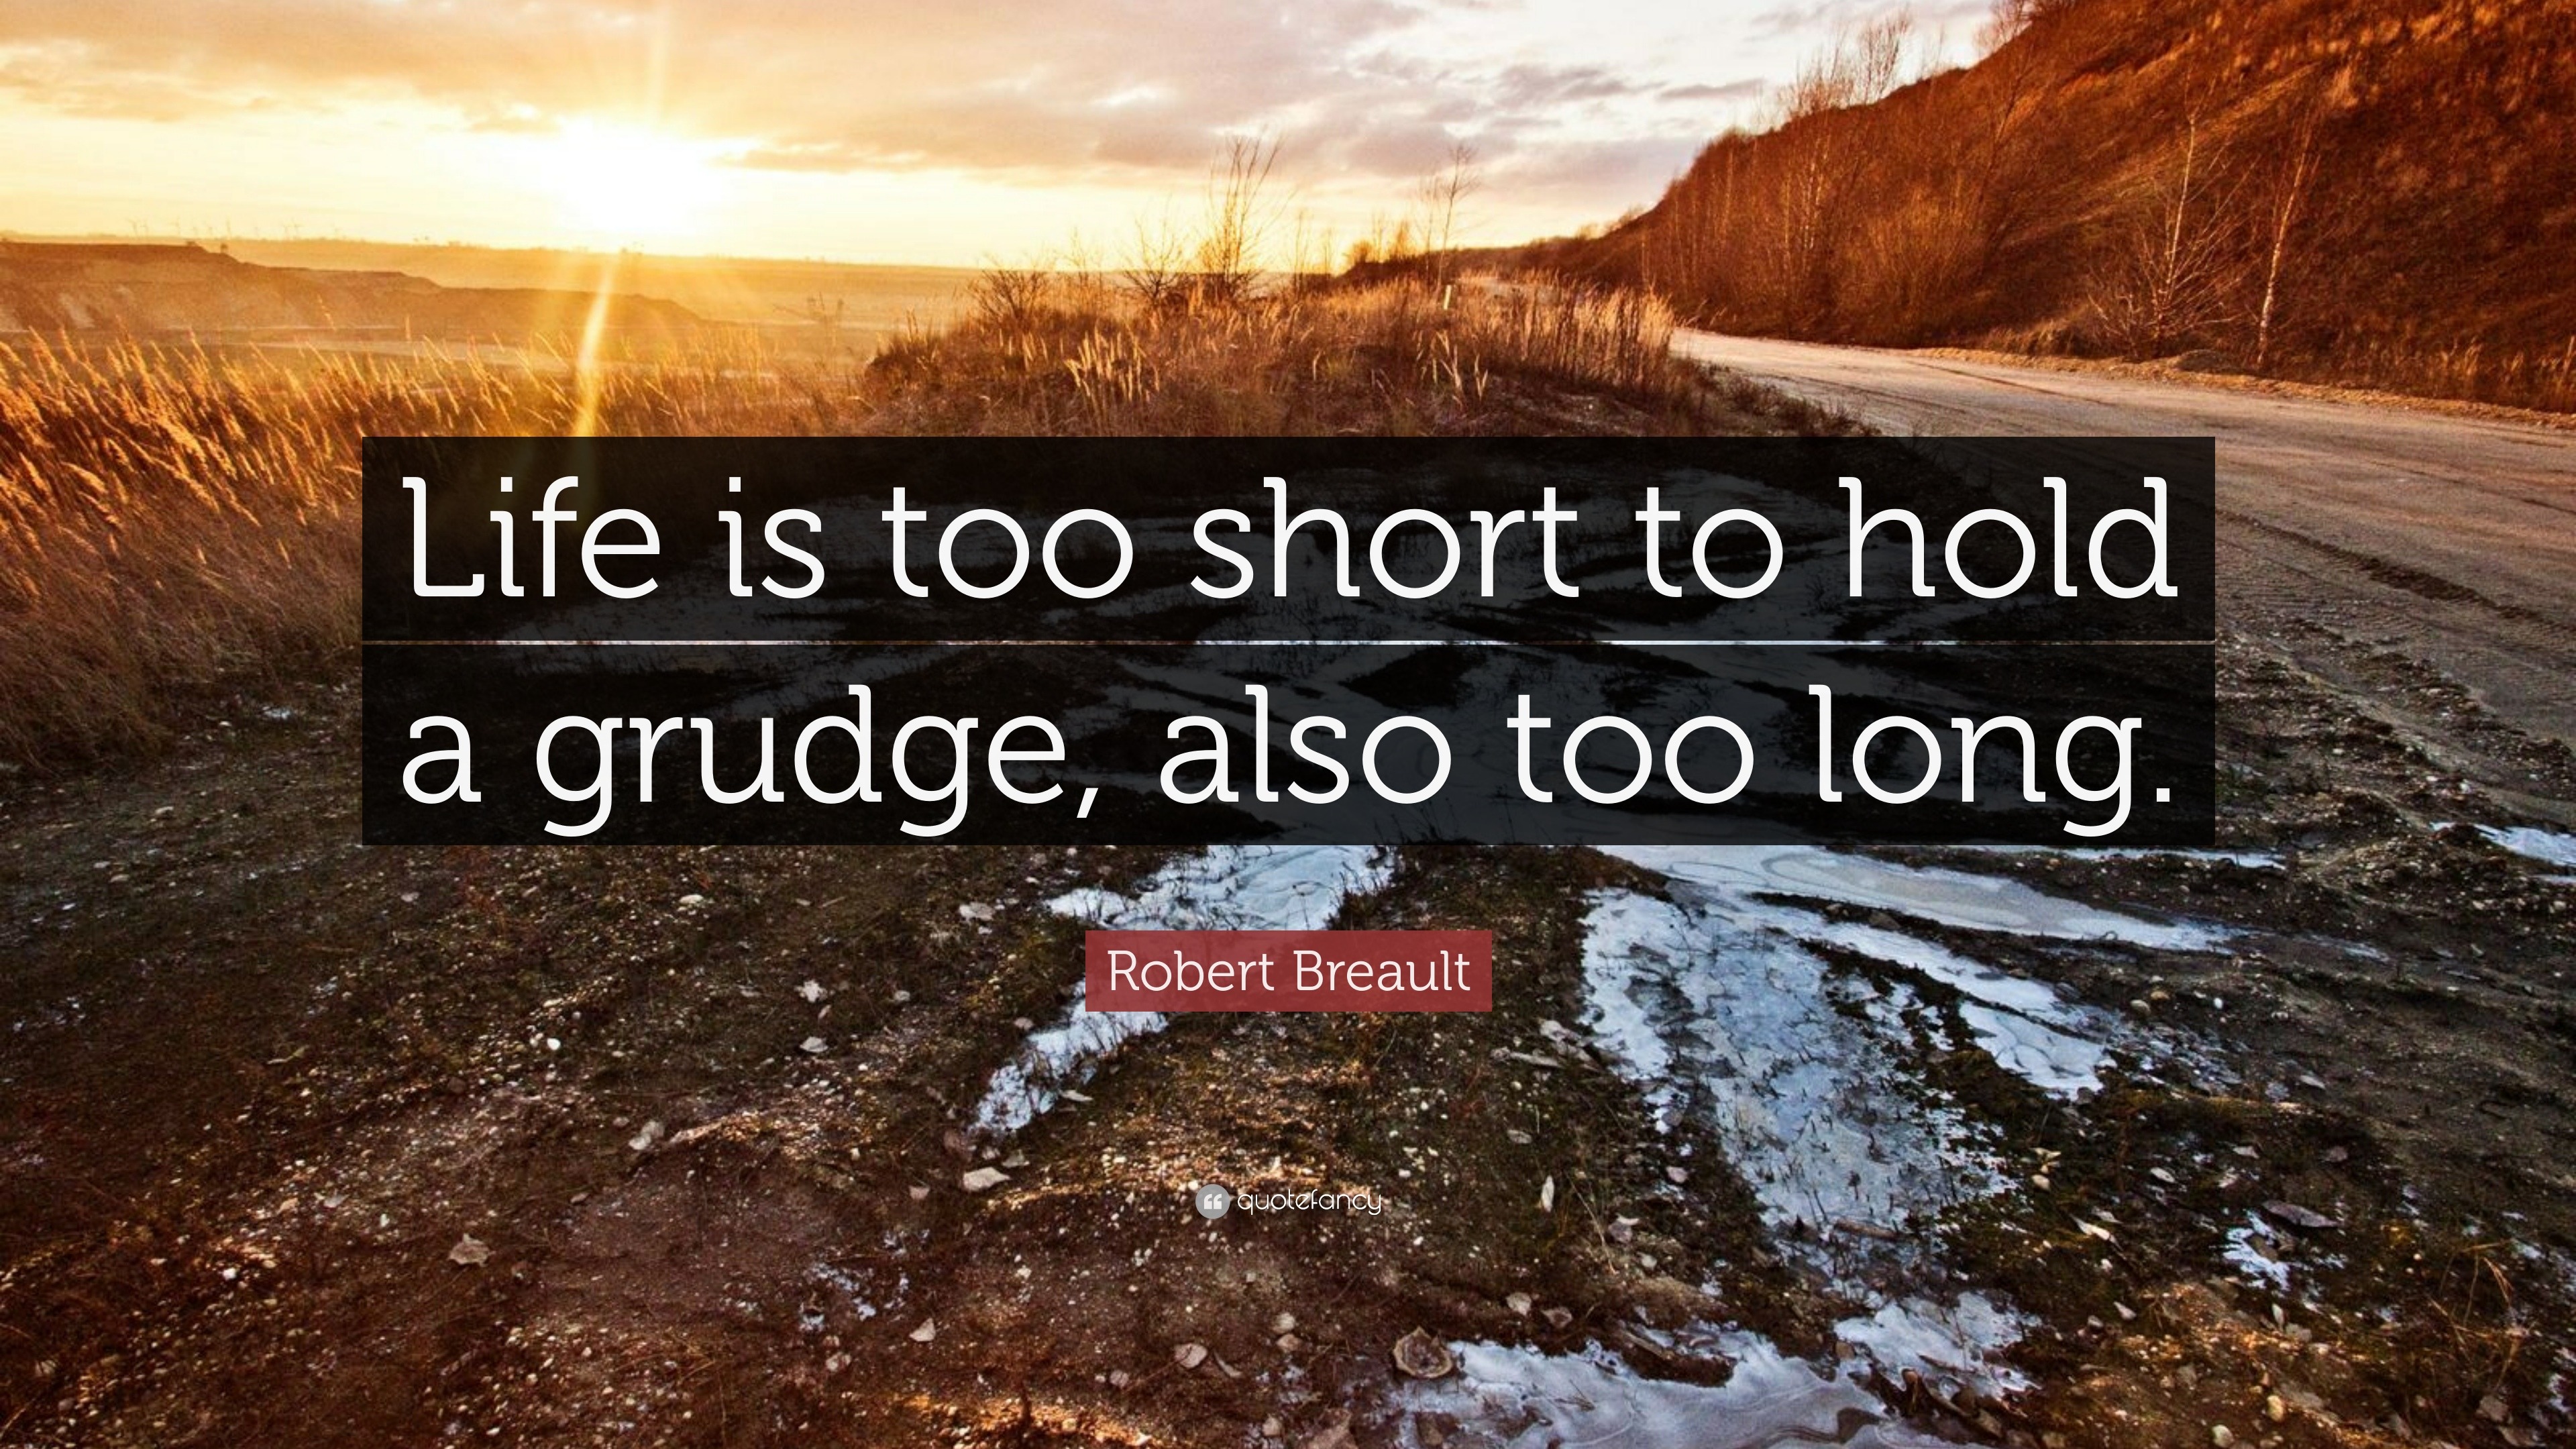 Robert Breault Quote “Life is too short to hold a grudge also too